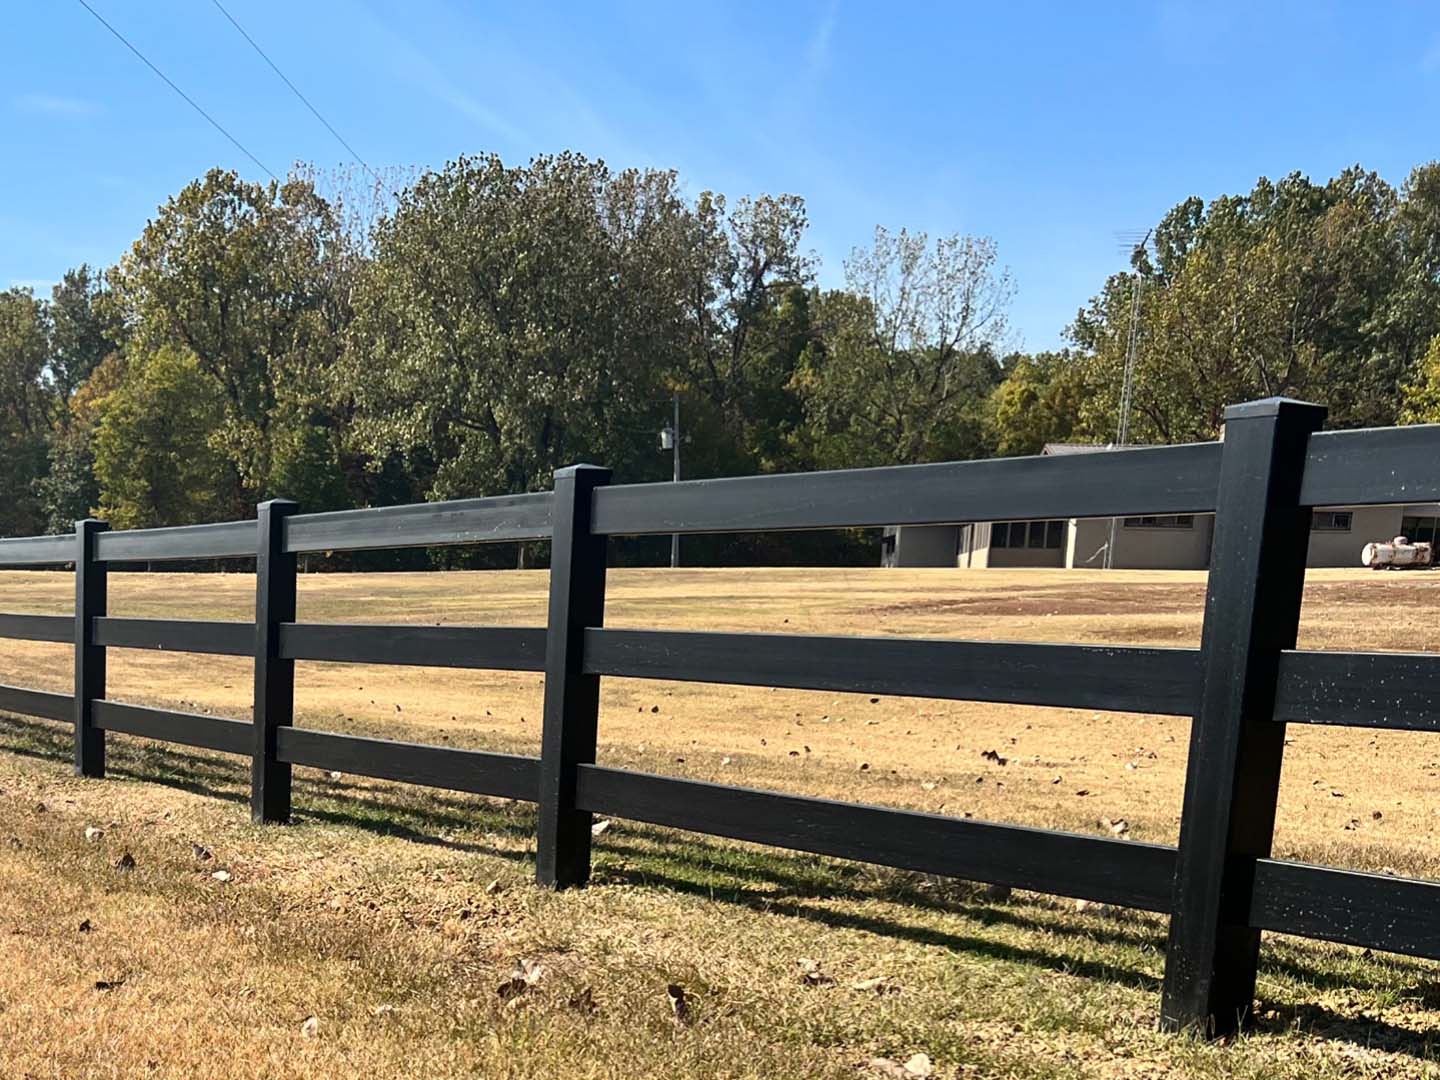 Commercial Vinyl Fence contractor in the Jackson Tennessee area.